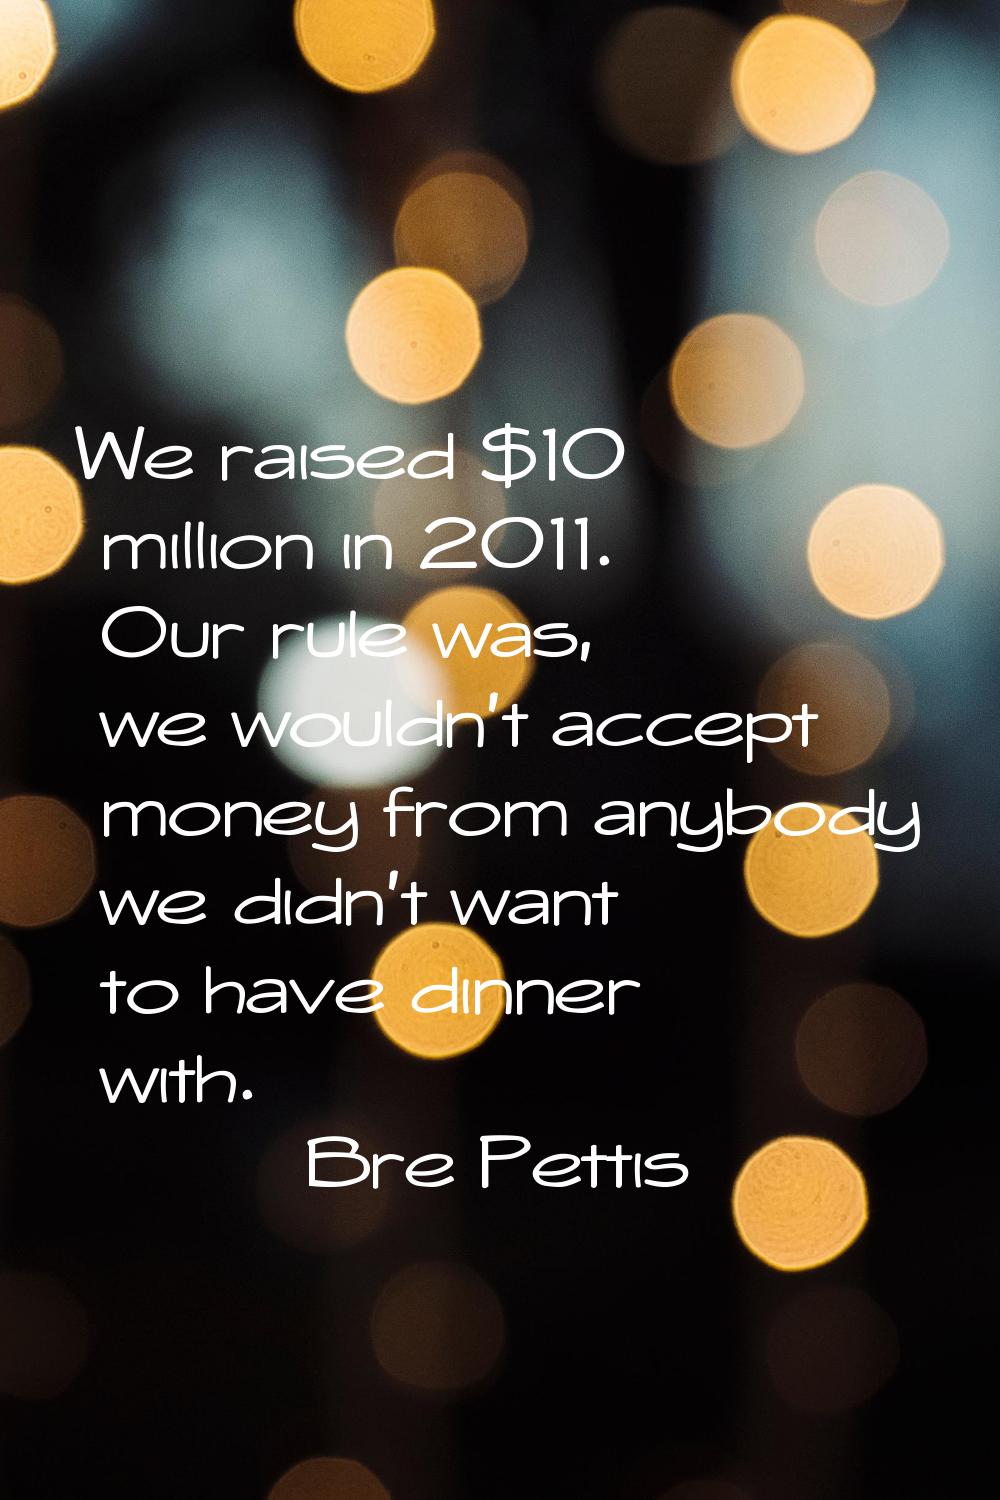 We raised $10 million in 2011. Our rule was, we wouldn't accept money from anybody we didn't want t